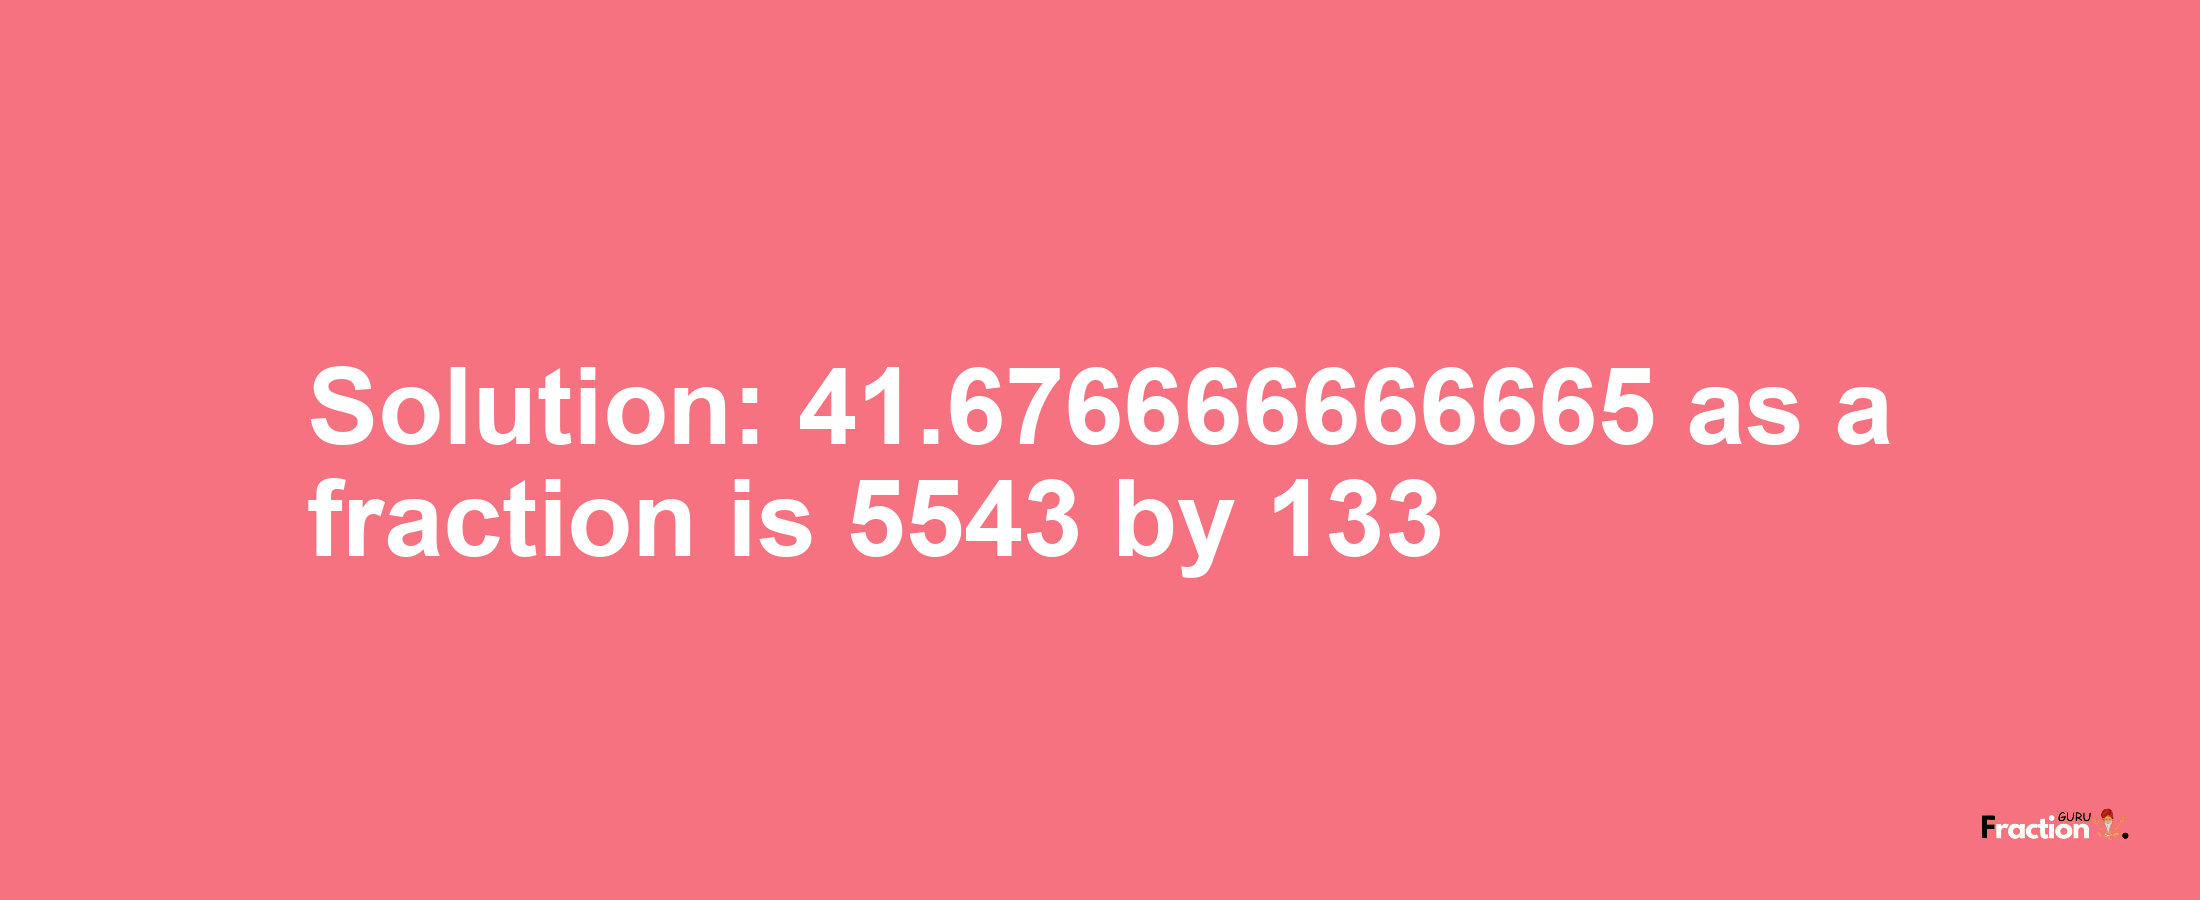 Solution:41.676666666665 as a fraction is 5543/133